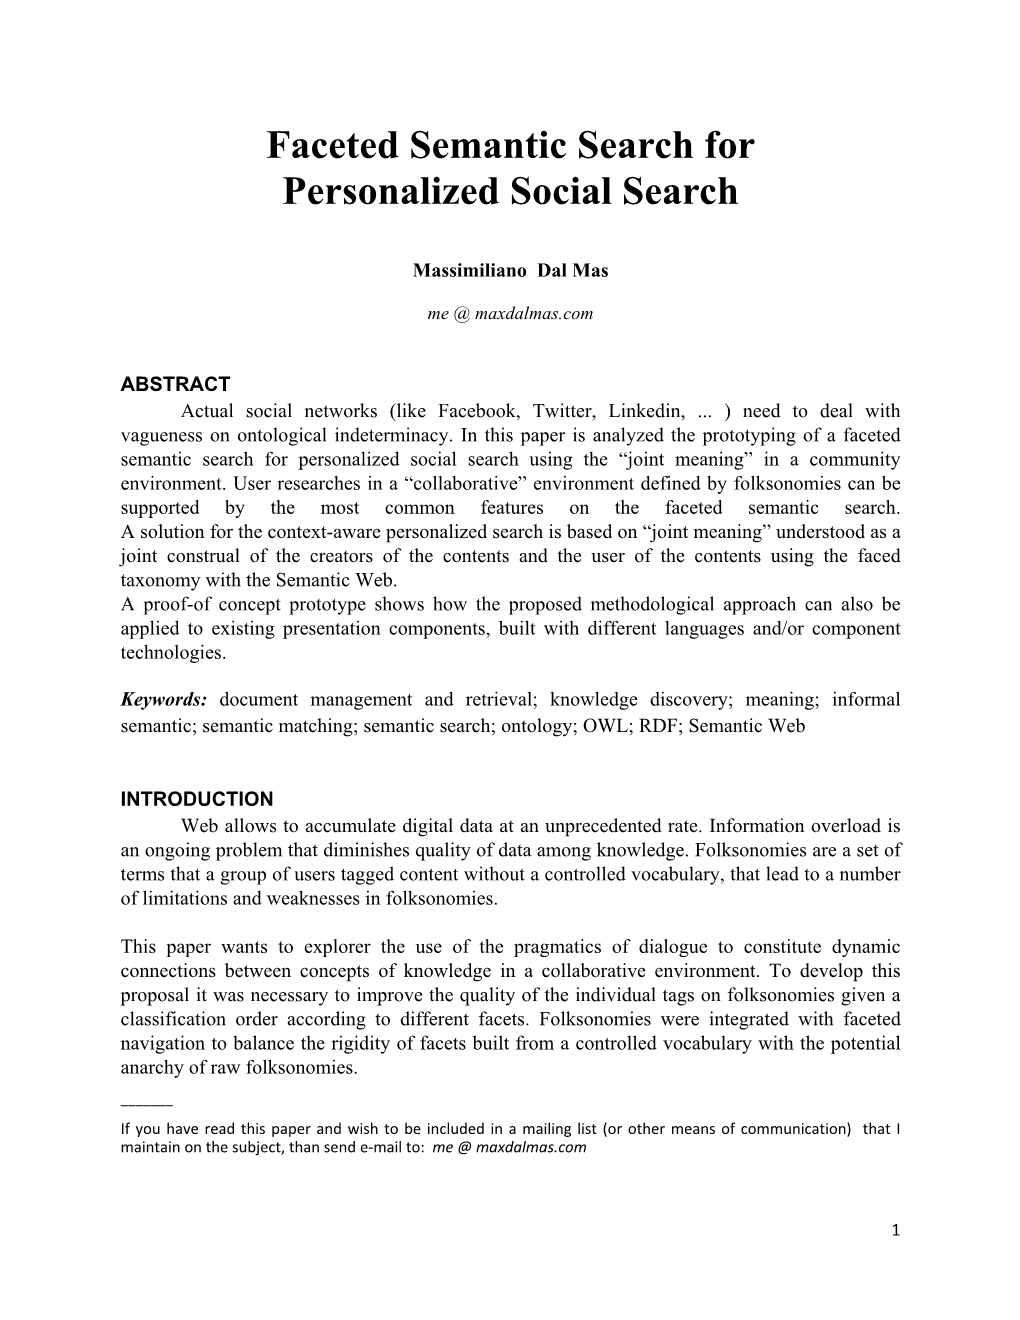 Faceted Semantic Search for Personalized Social Search